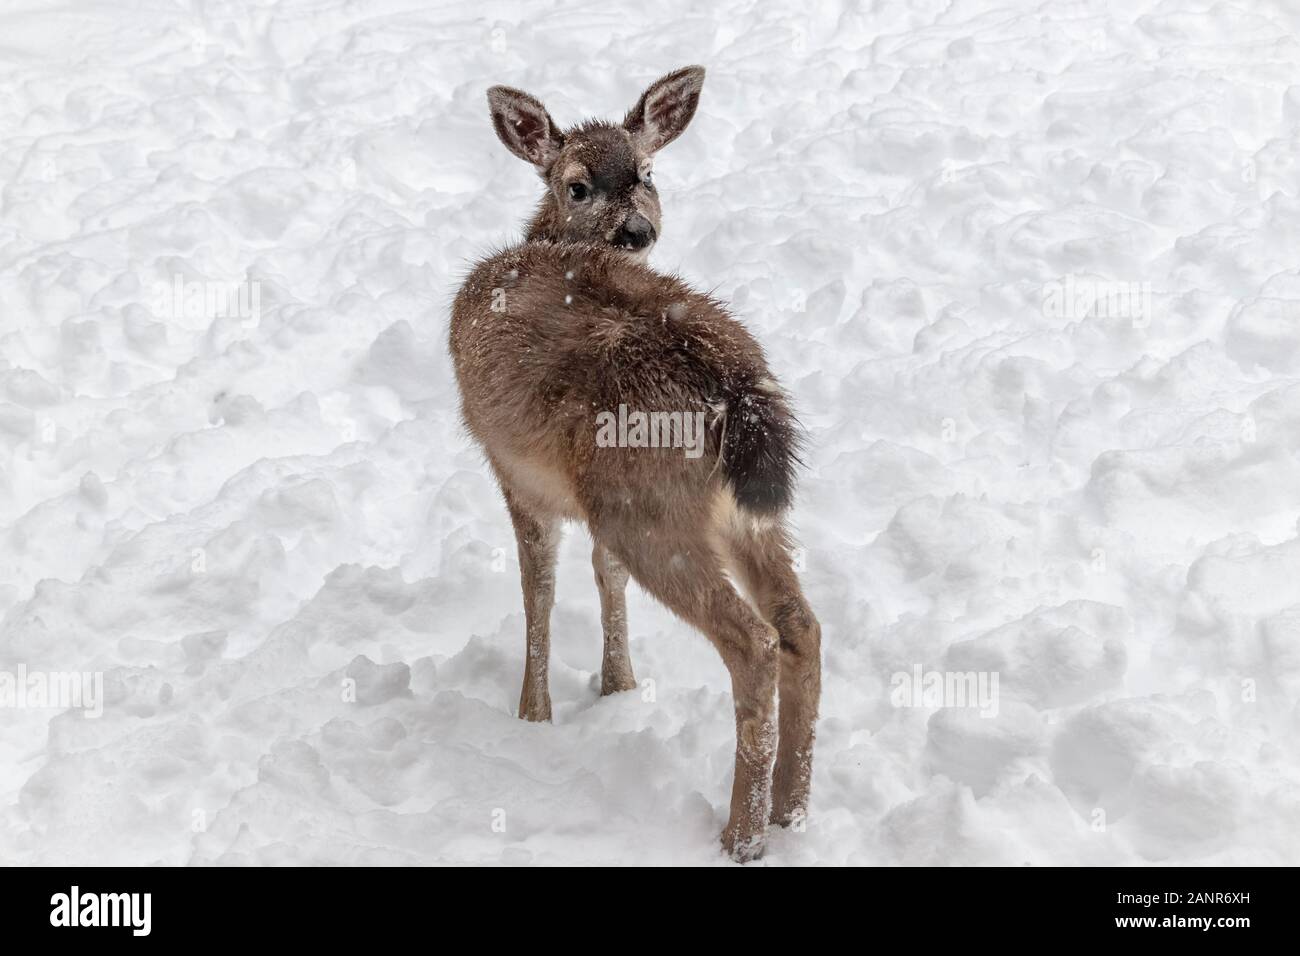 Looking dishevelled and confused, a fawn experiencing its first winter stands alone in the snow, staring over its shoulder, wide-eyed, at the viewer. Stock Photo